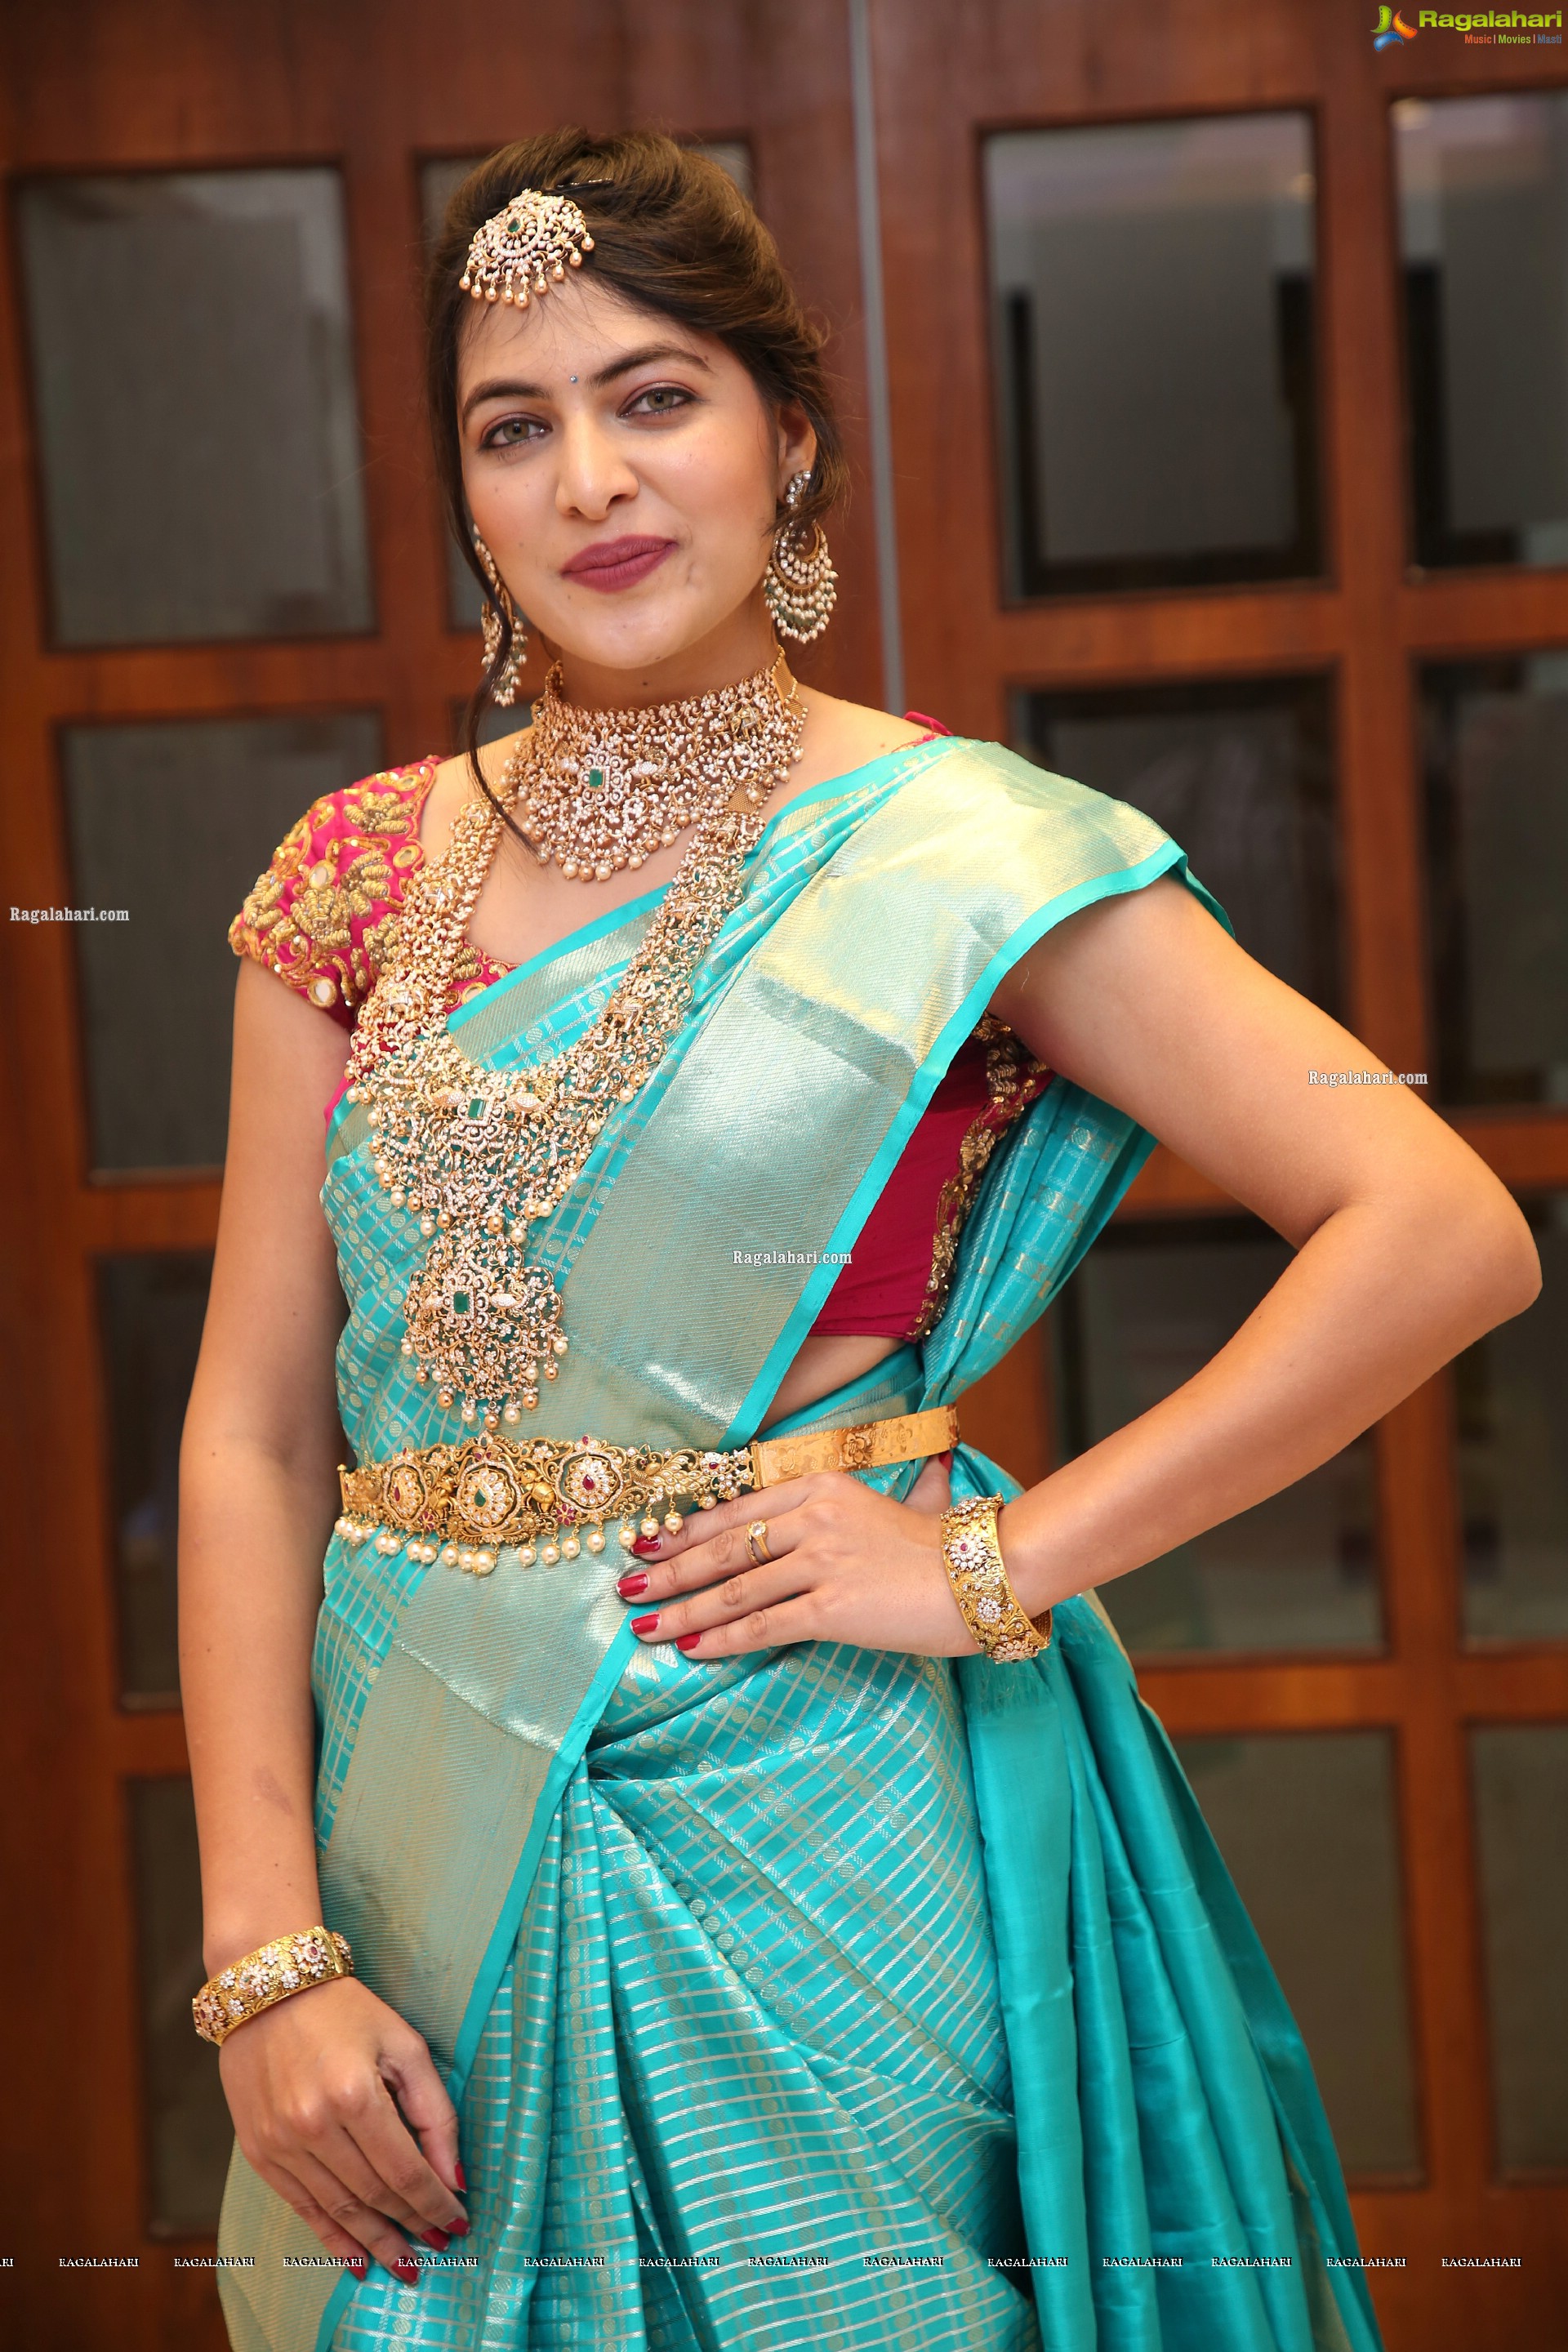 Supraja Reddy Poses With Gold Jewellery, HD Photo Gallery